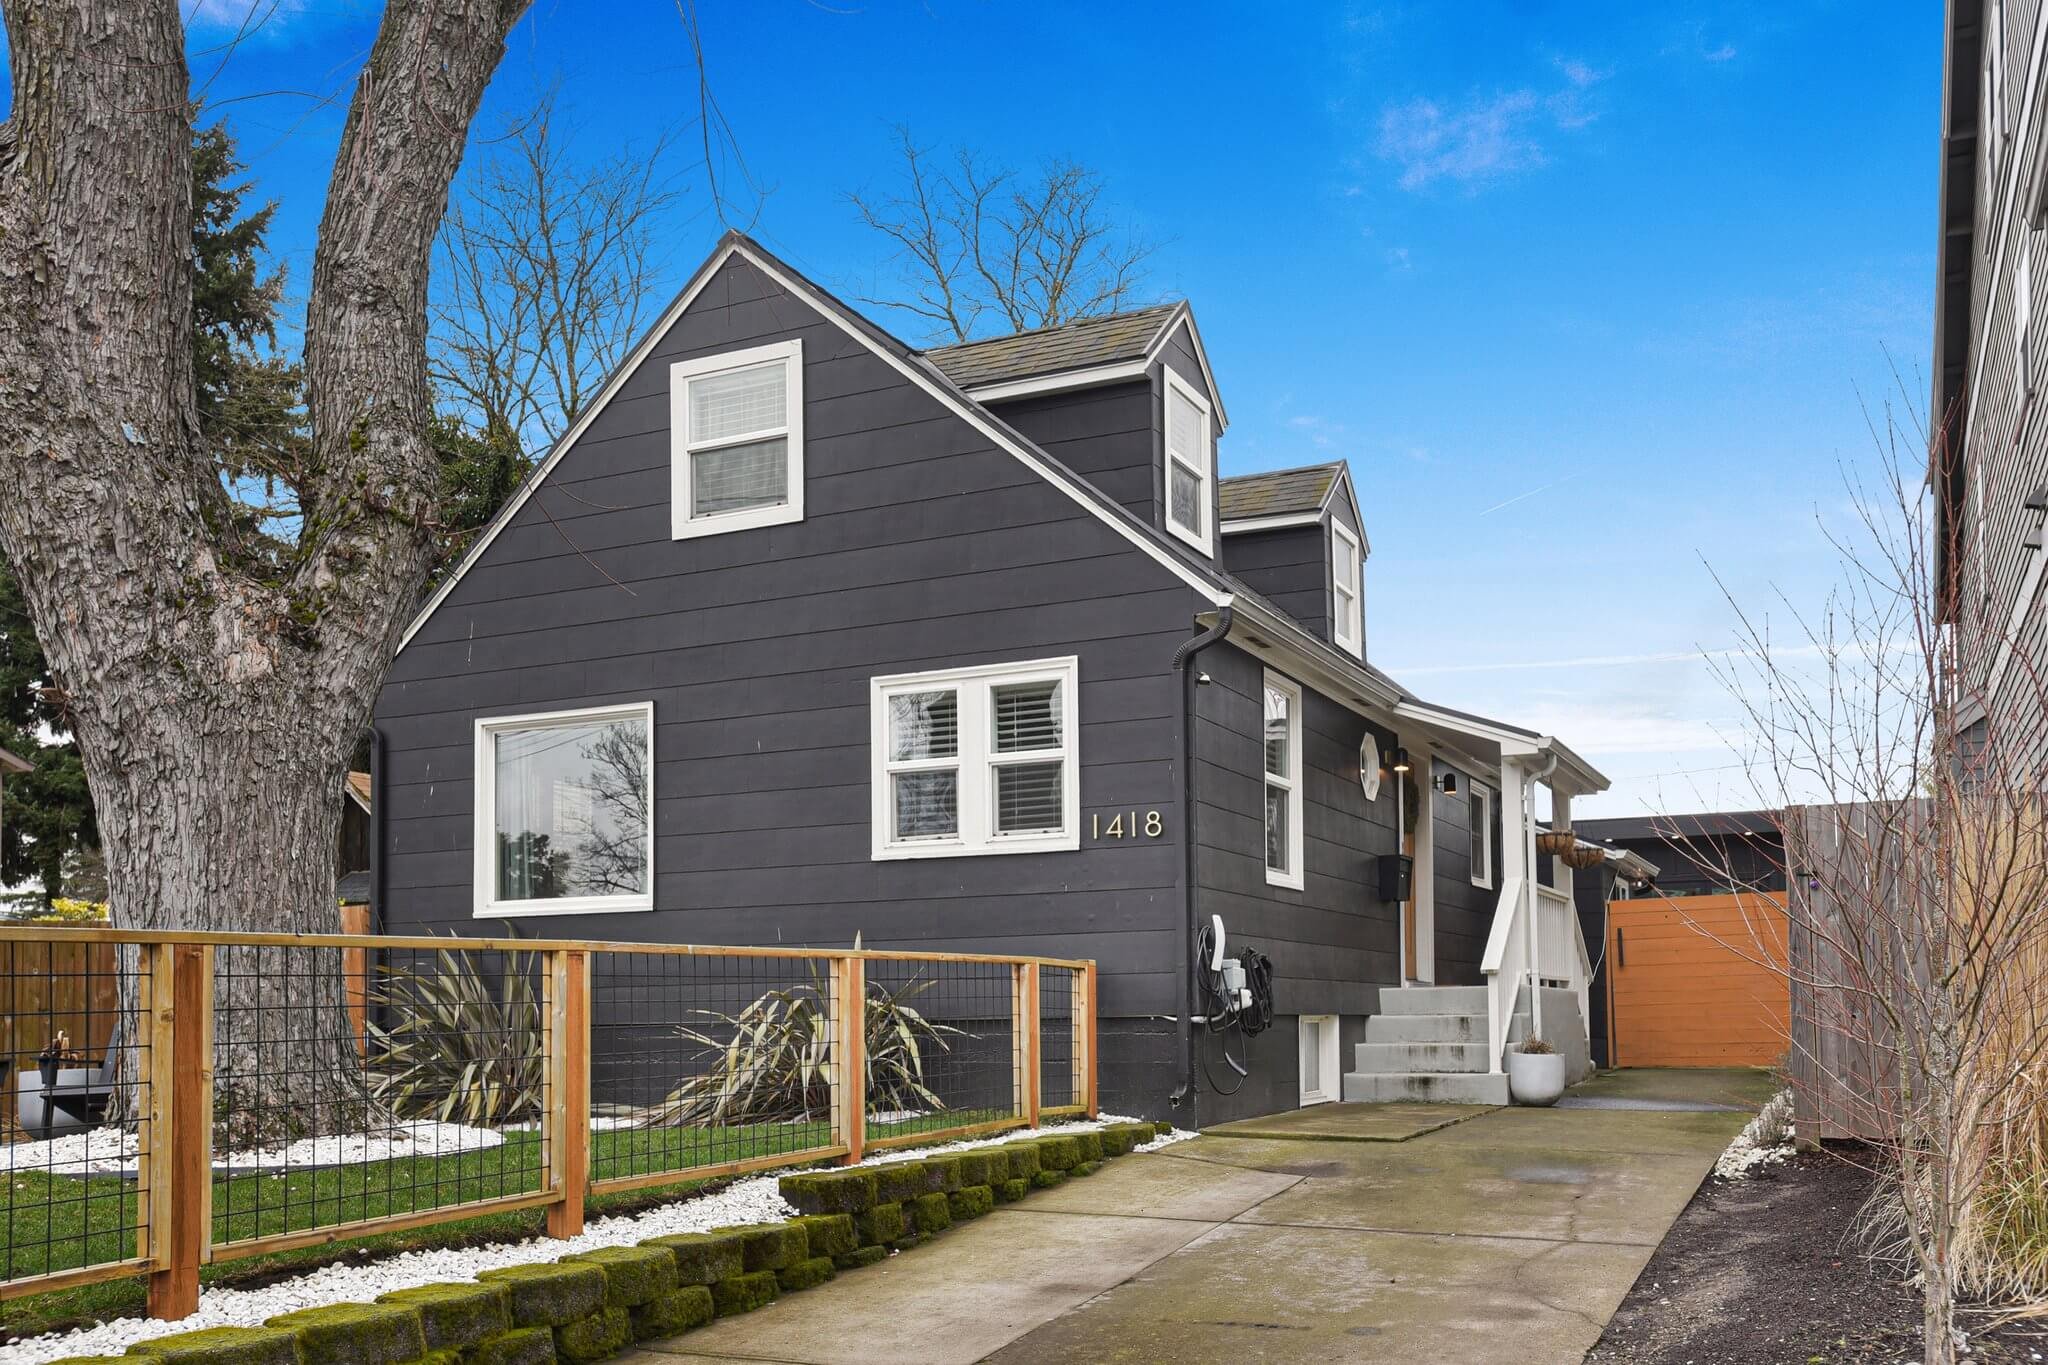 1418 SE 88th Ave. &lt;strong&gt;SOLD&lt;/strong&gt;